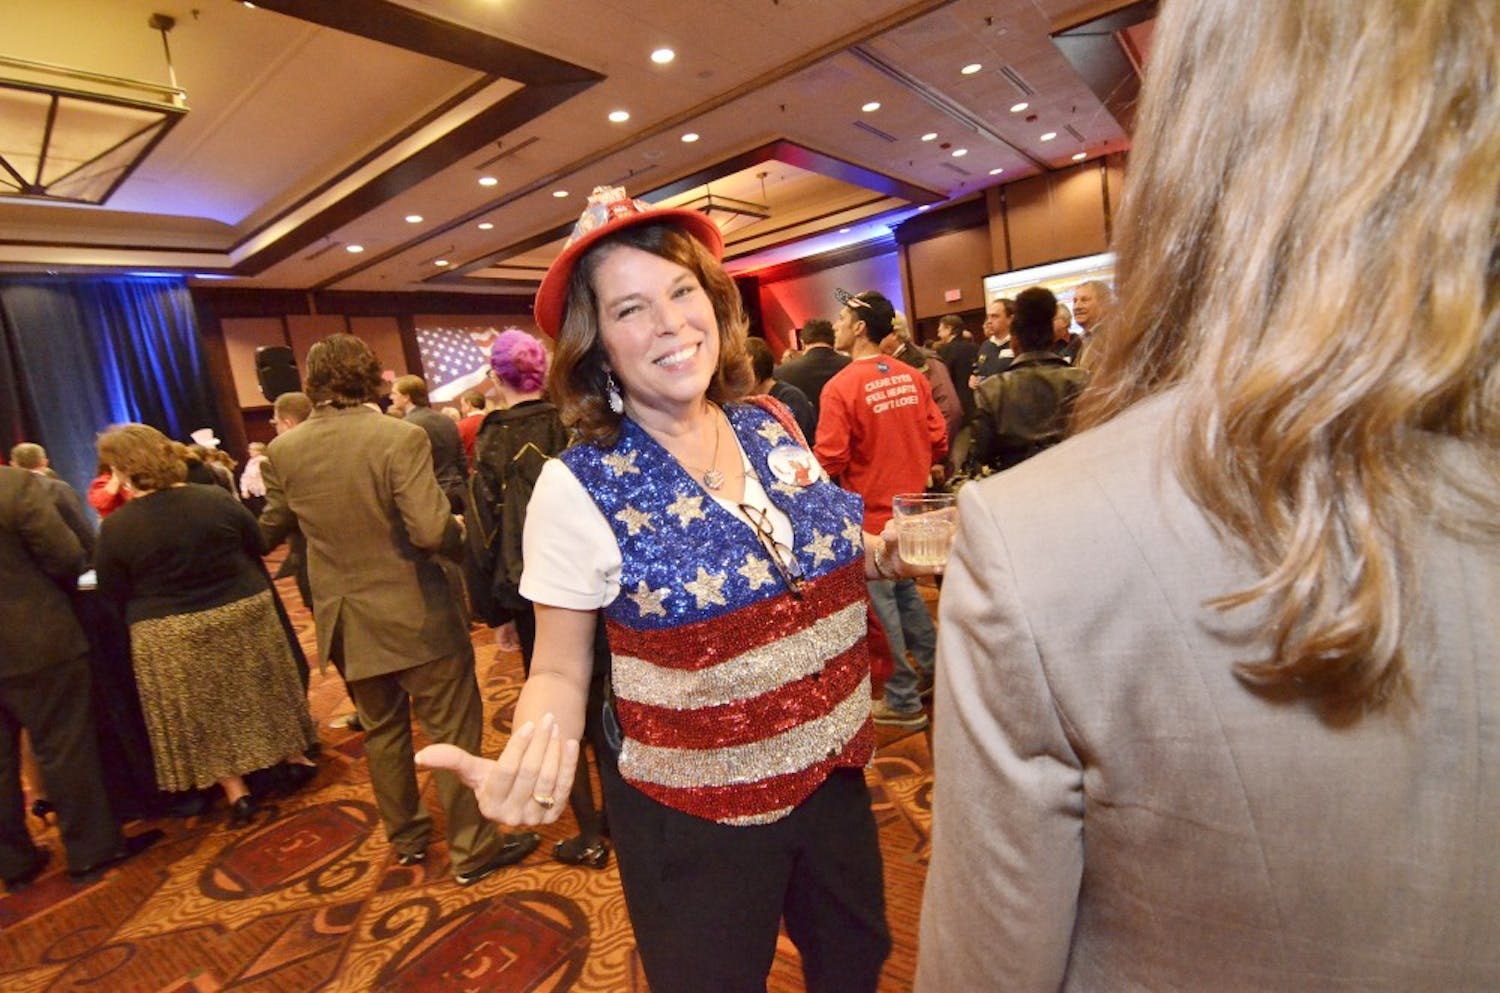 Donna Williams of Raleigh shows off her GOP pride